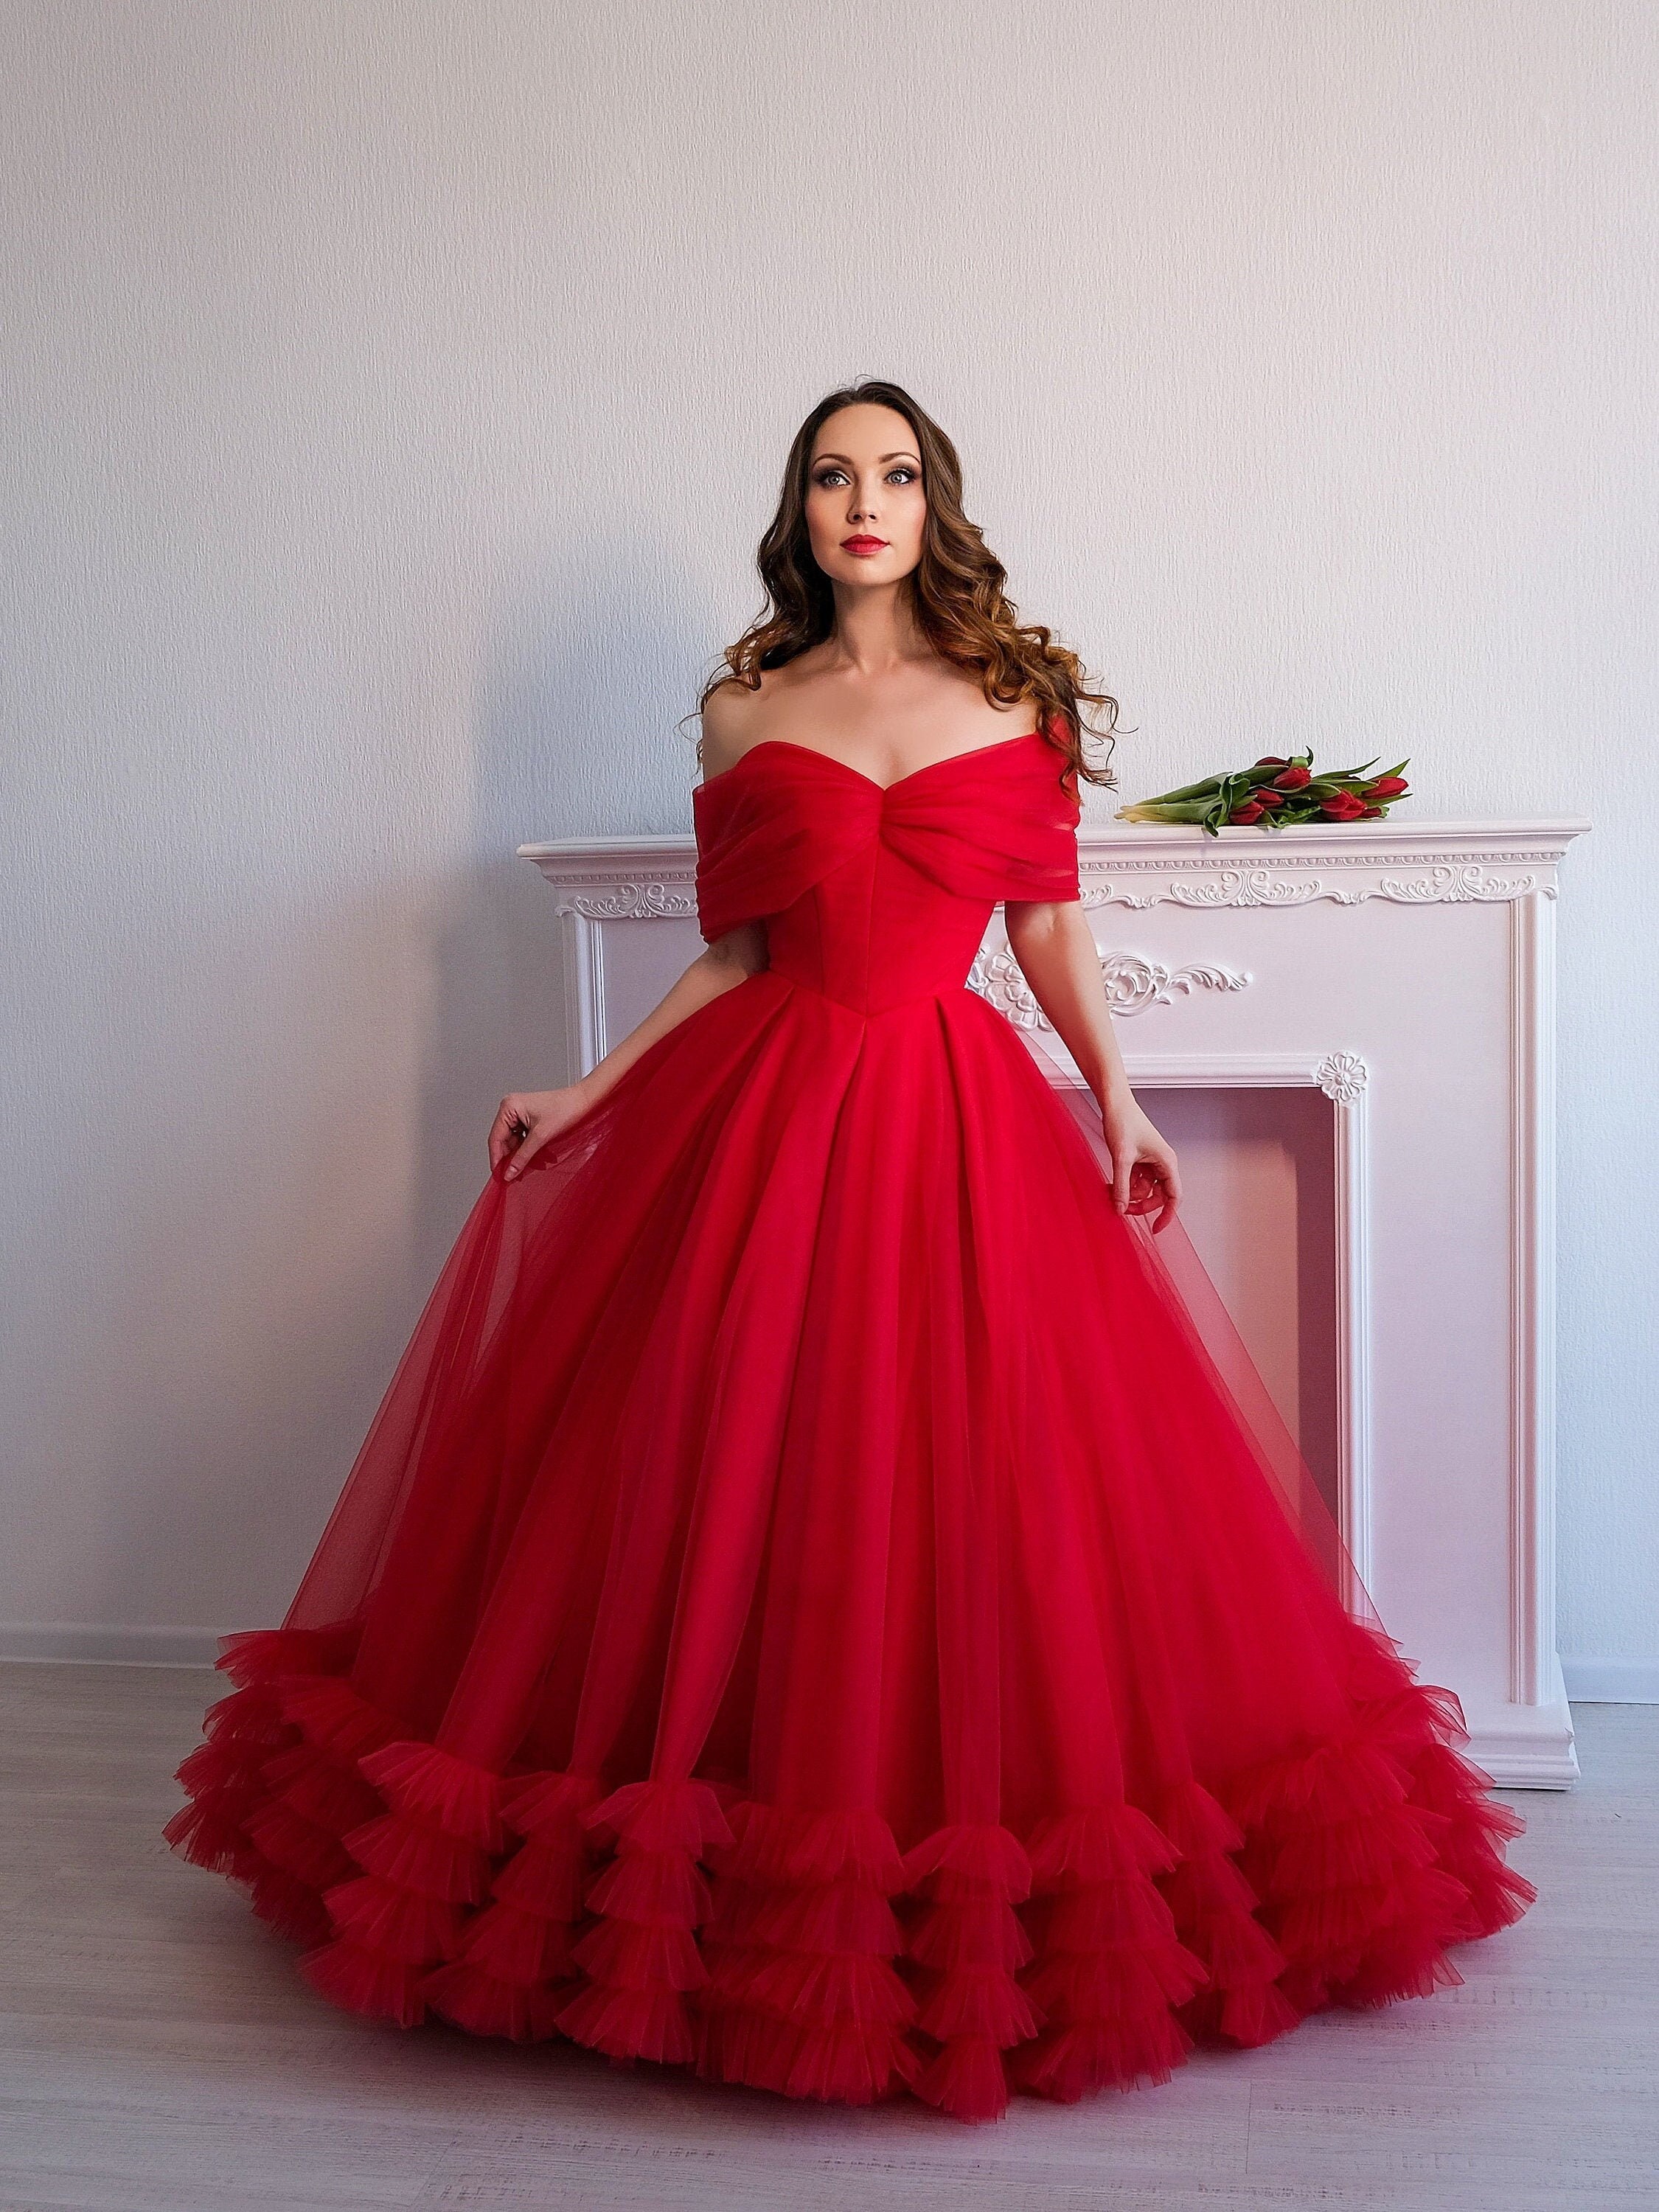 red gown dress